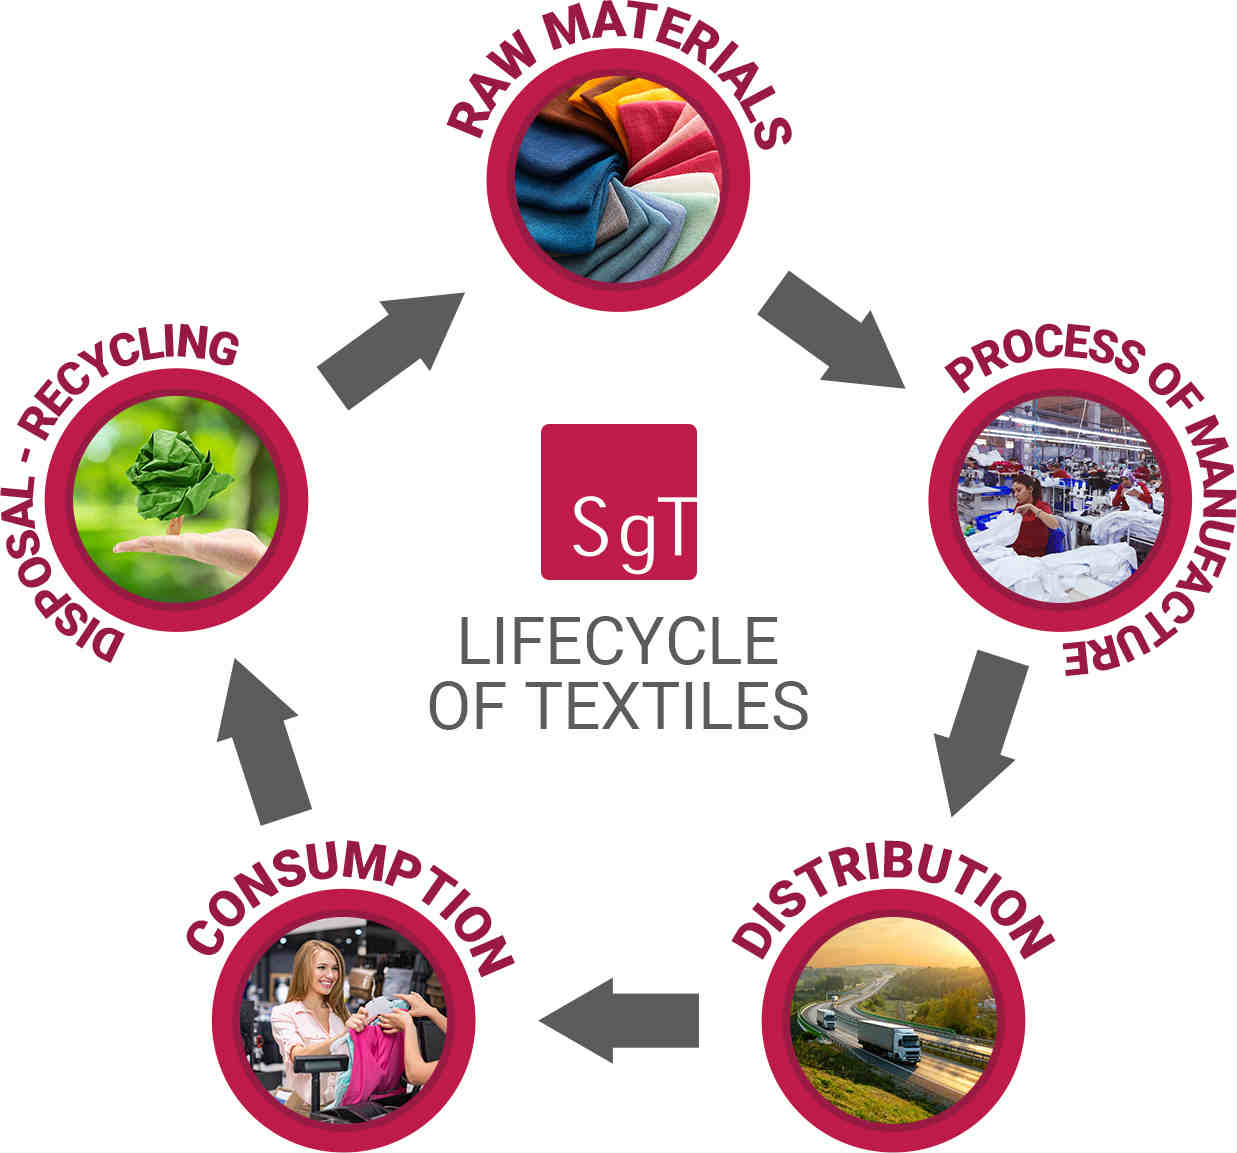 sgt sustainable textiles lifecycle